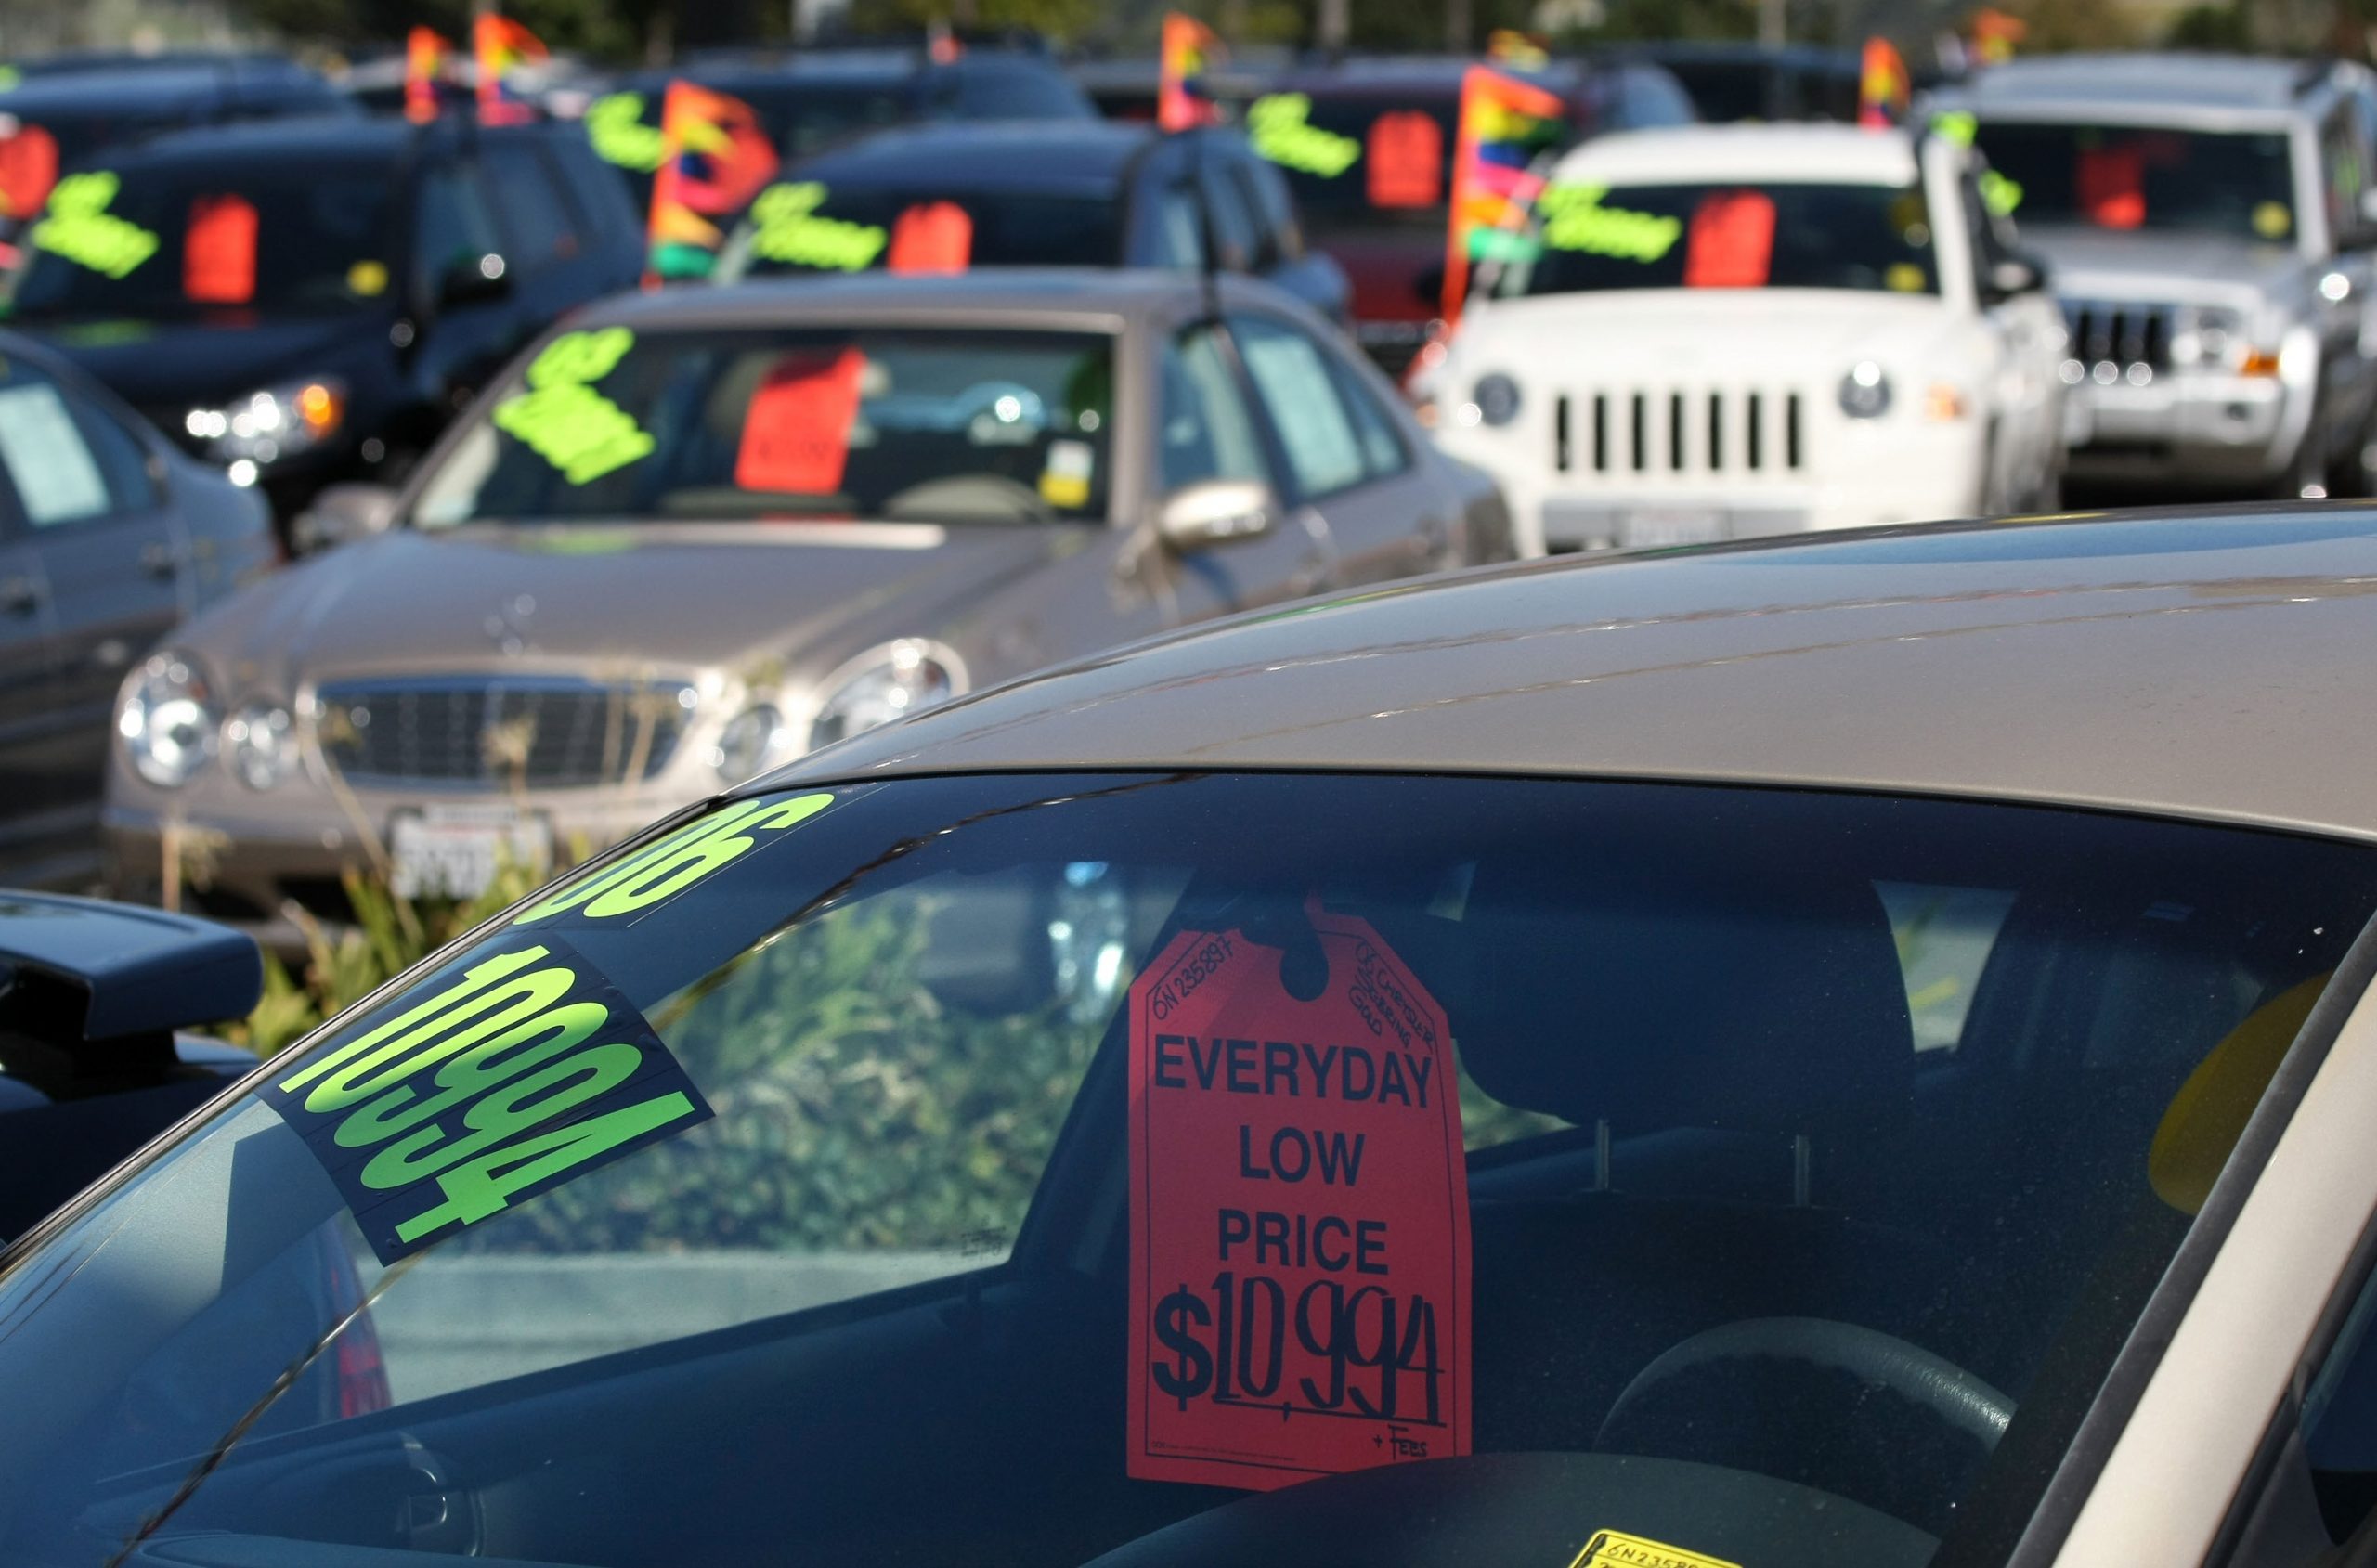 A full used car lot, a rare sight during this unprecedented rise in used car prices